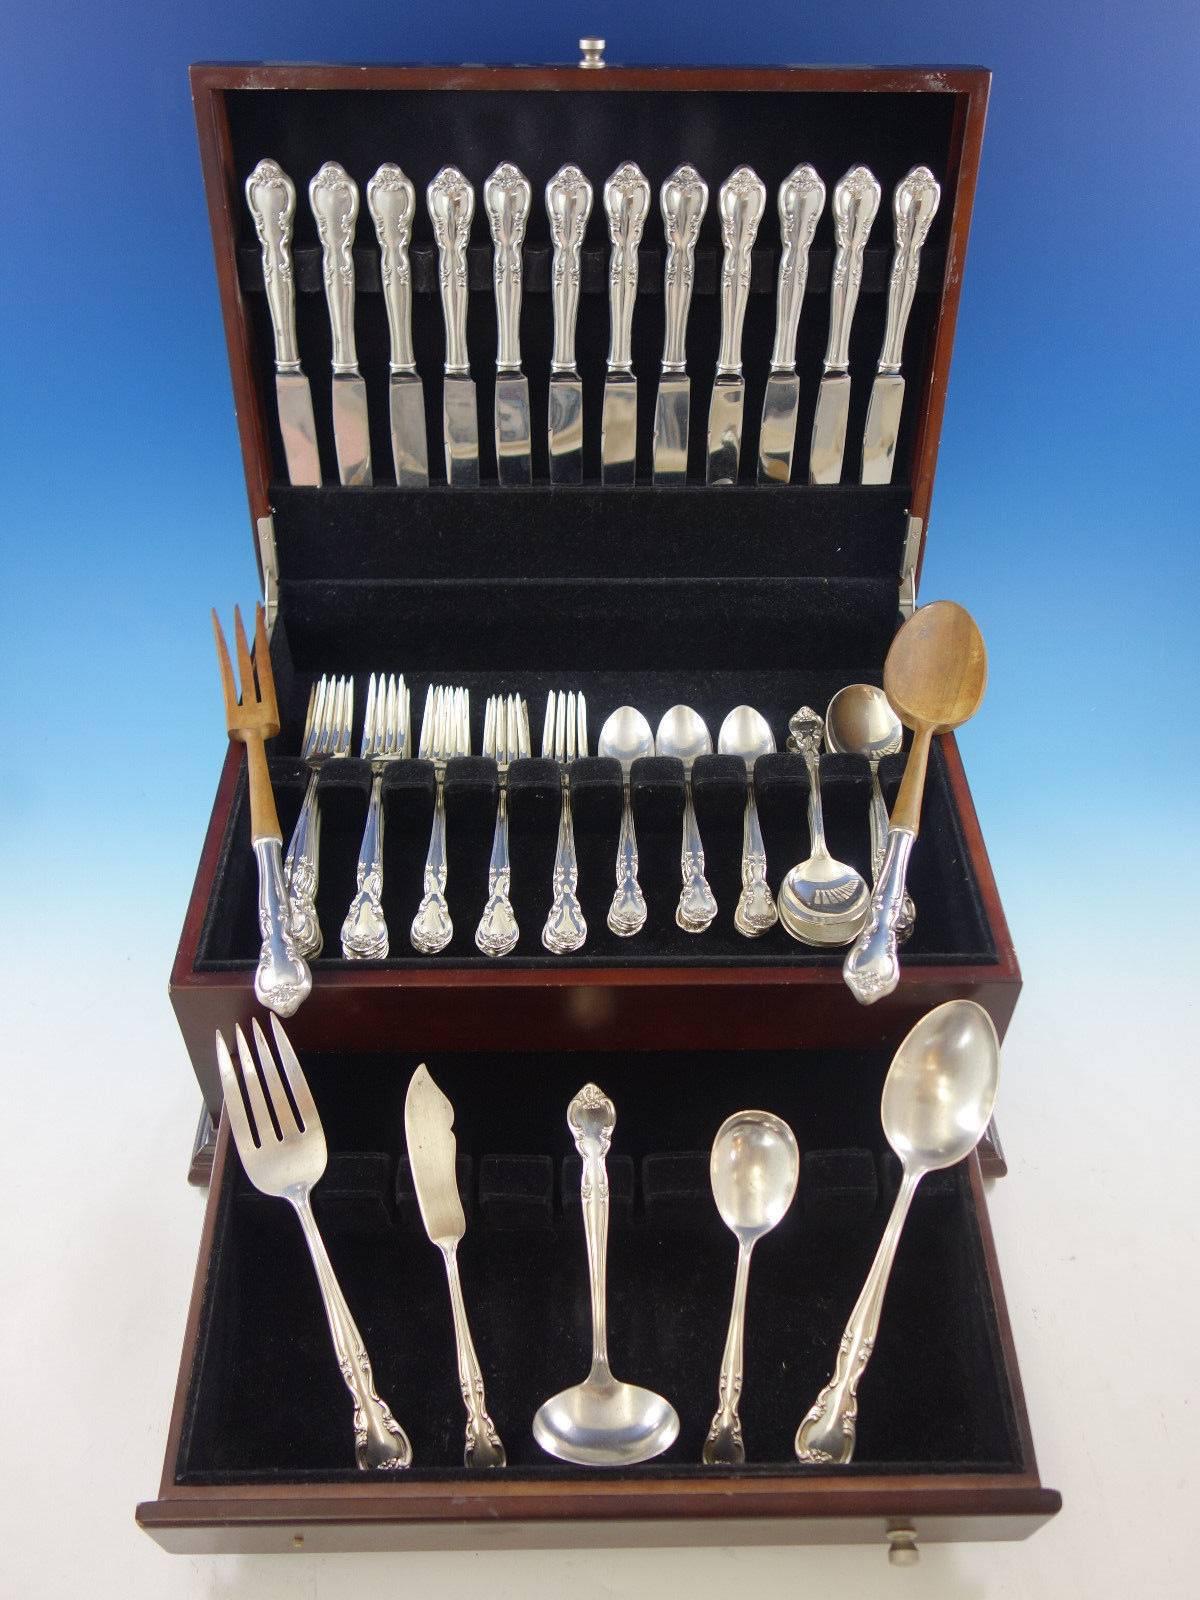 American Classic by Easterling sterling silver flatware set, 67 pieces. This set includes:

12 knives, 8 3/4